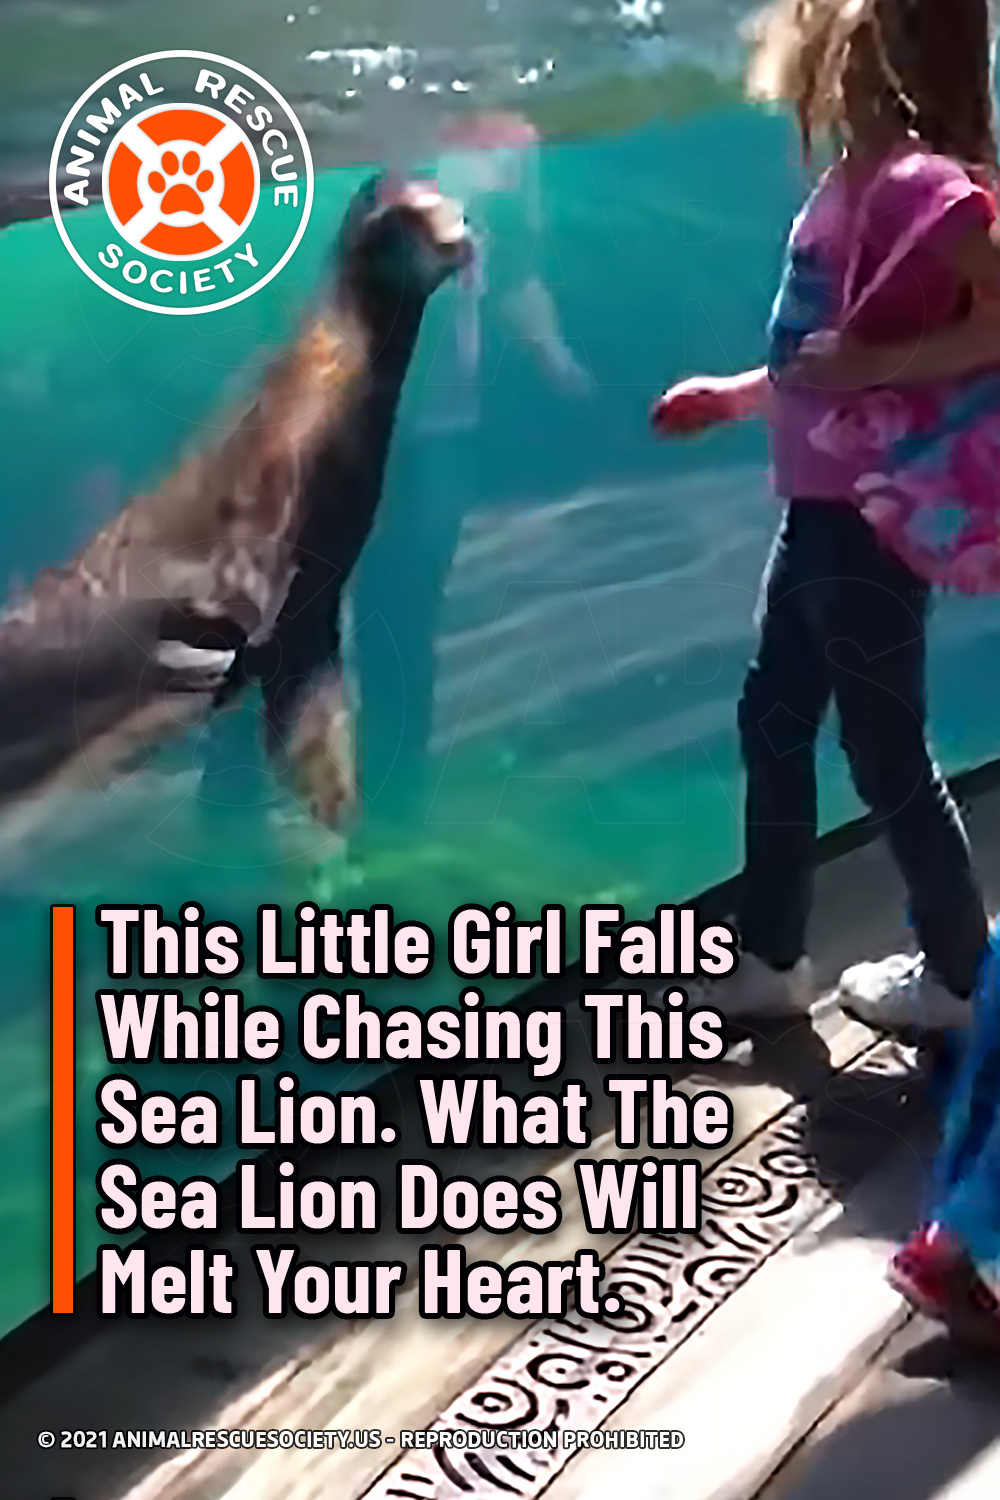 This Little Girl Falls While Chasing This Sea Lion. What The Sea Lion Does Will Melt Your Heart.